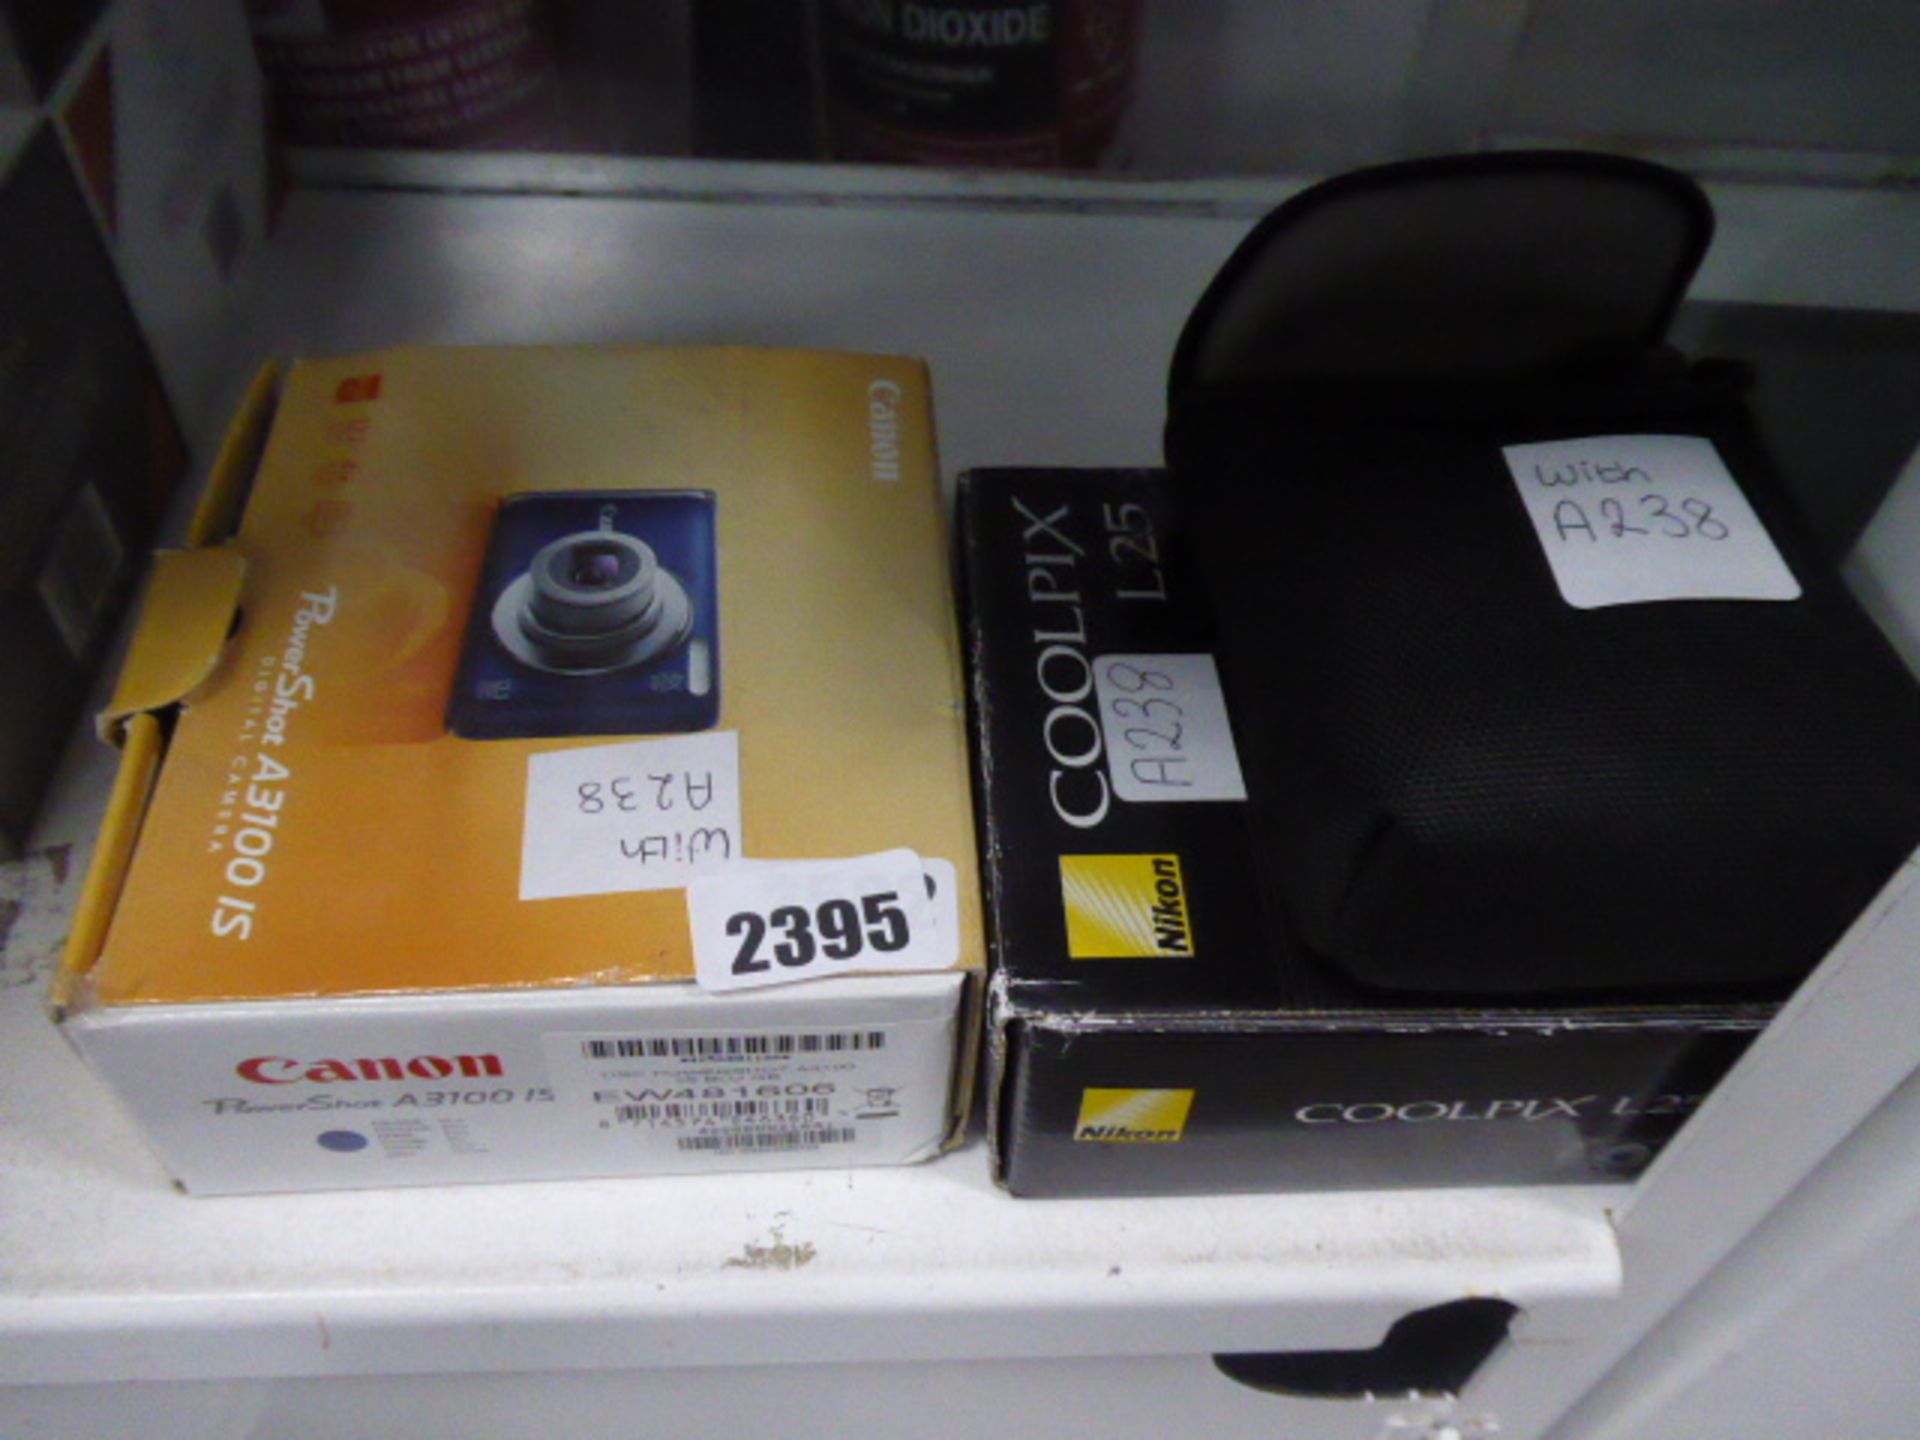 2502. Canon Powershot digital camera together with Nikkon CoolPix and one other camera loose in bag